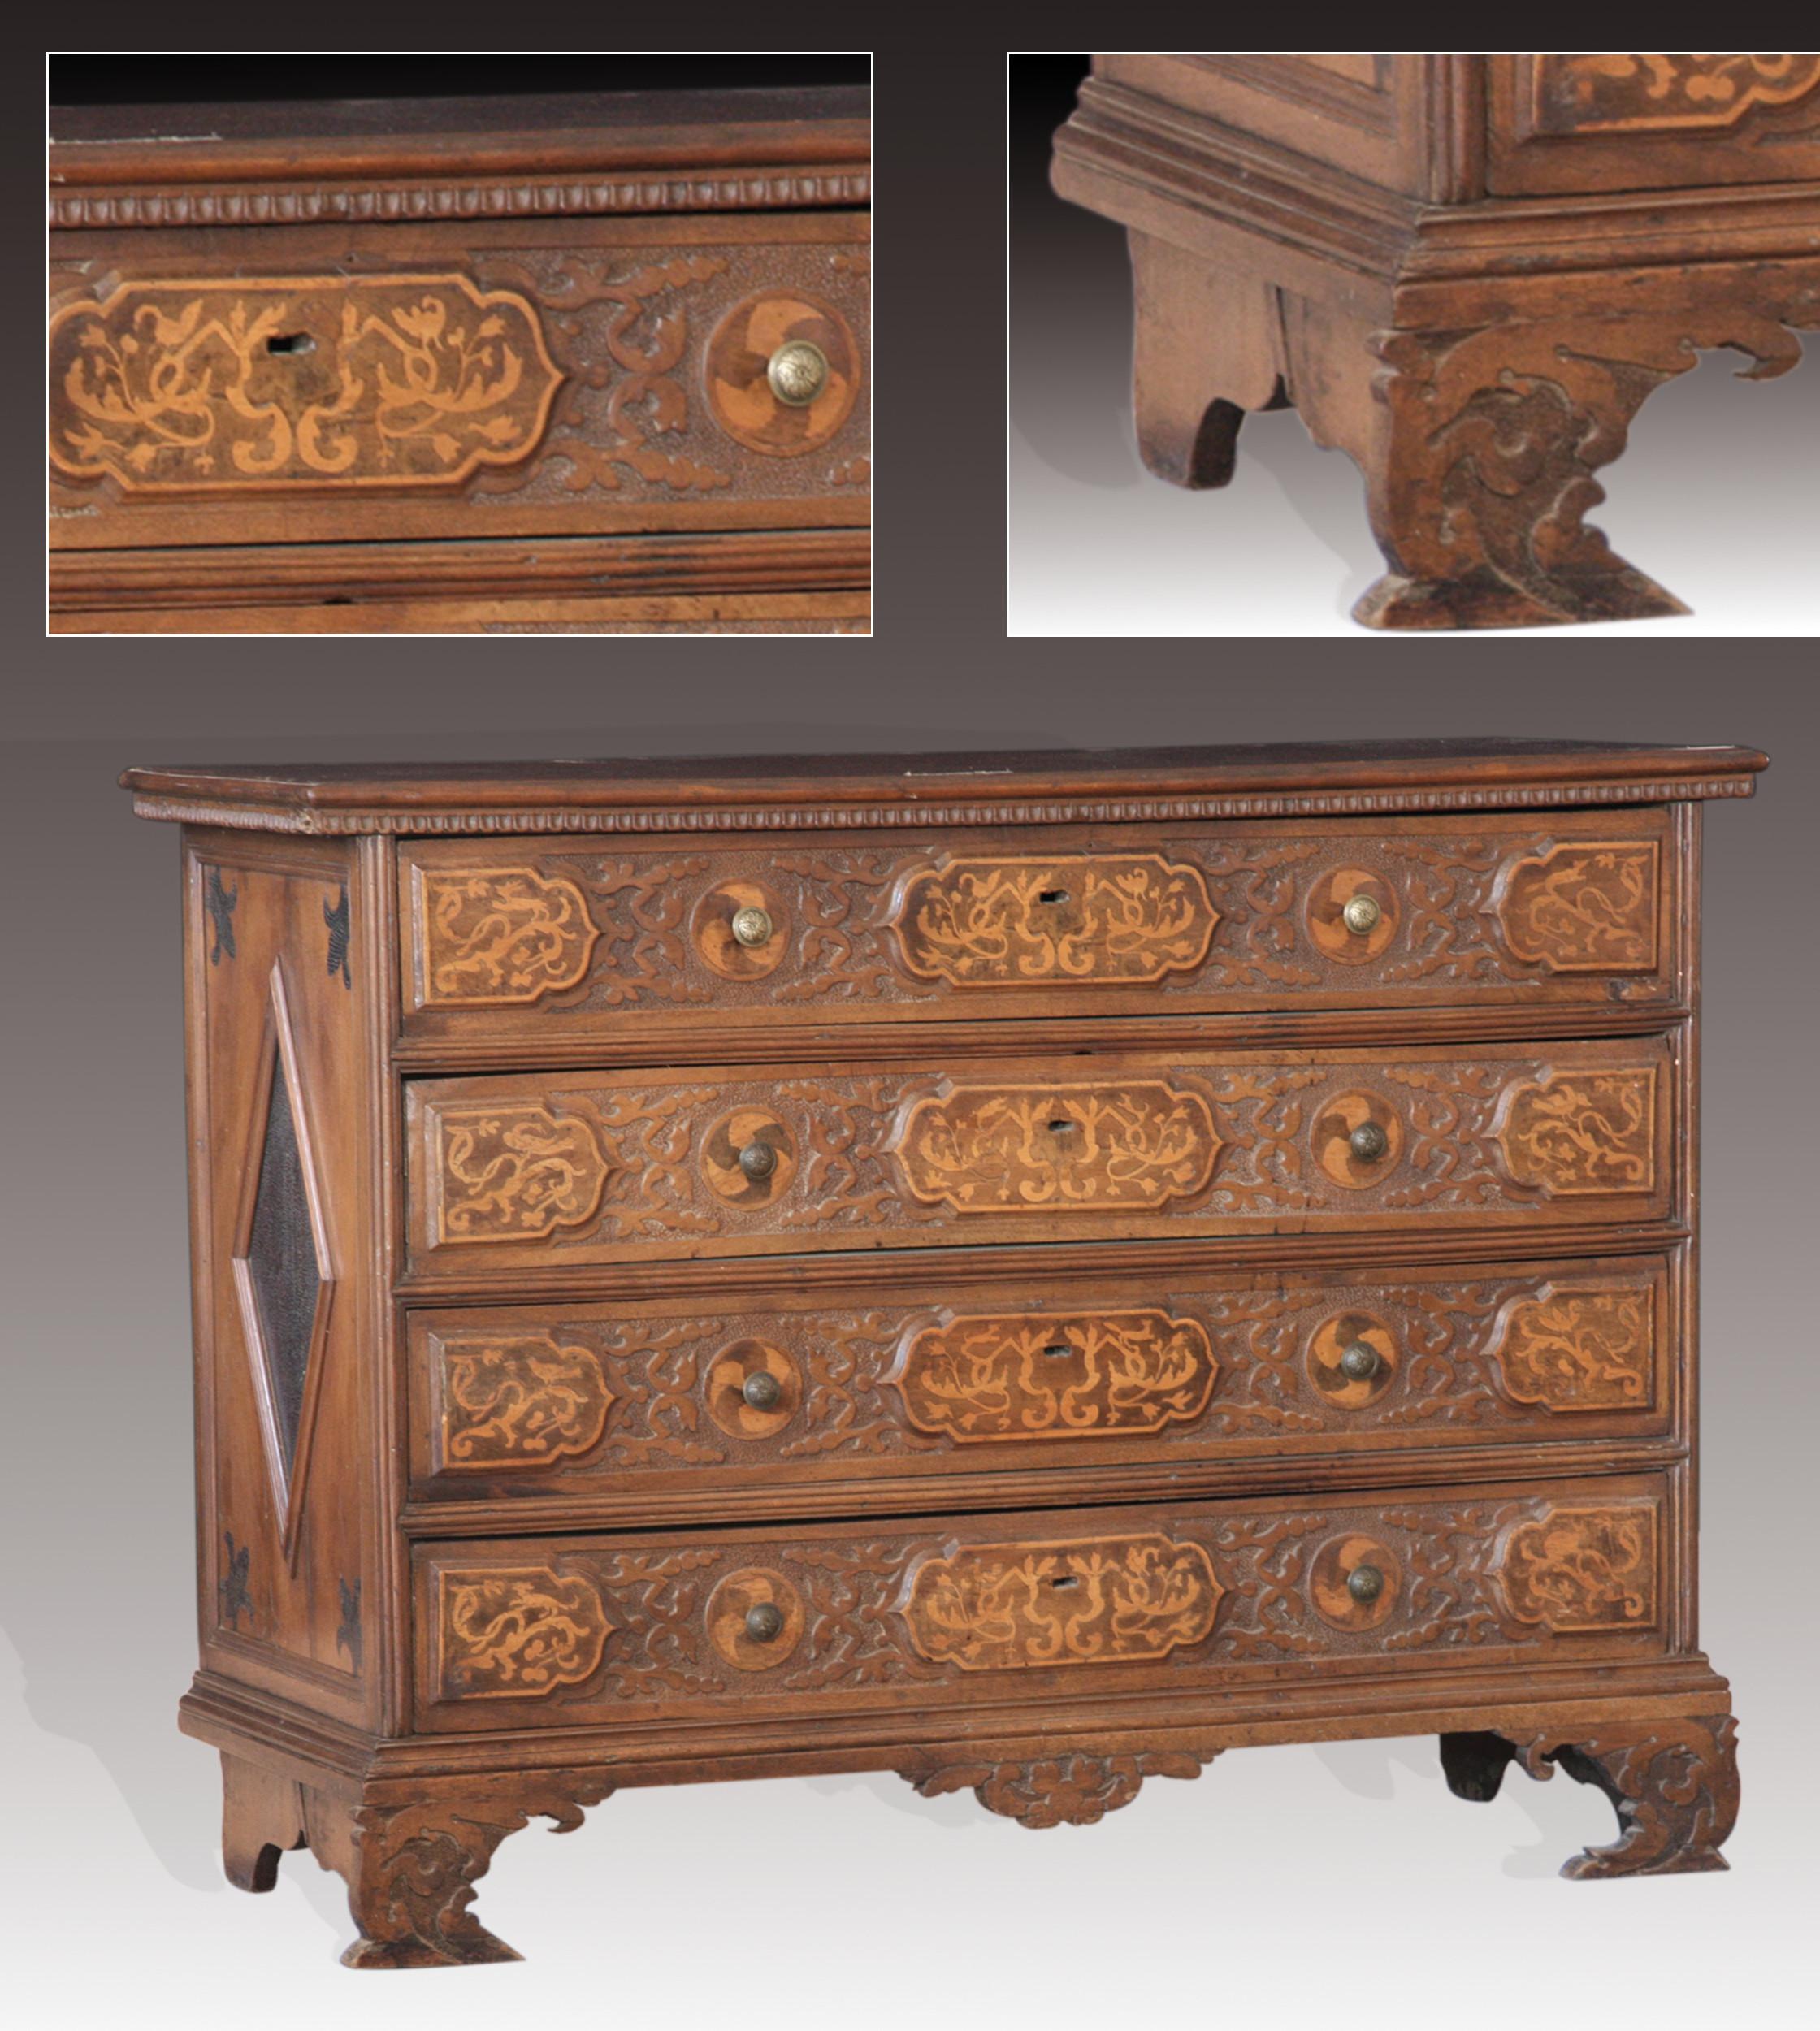 Spanish canterano from the early 1700s
Walnut canter with carved decoration on the solid wood and ashlars with inlays.
Refined furniture.
Measurements: Length cm 142 - Depth cm 56 - Height cm 105

Code 7 
0R -0M,S
